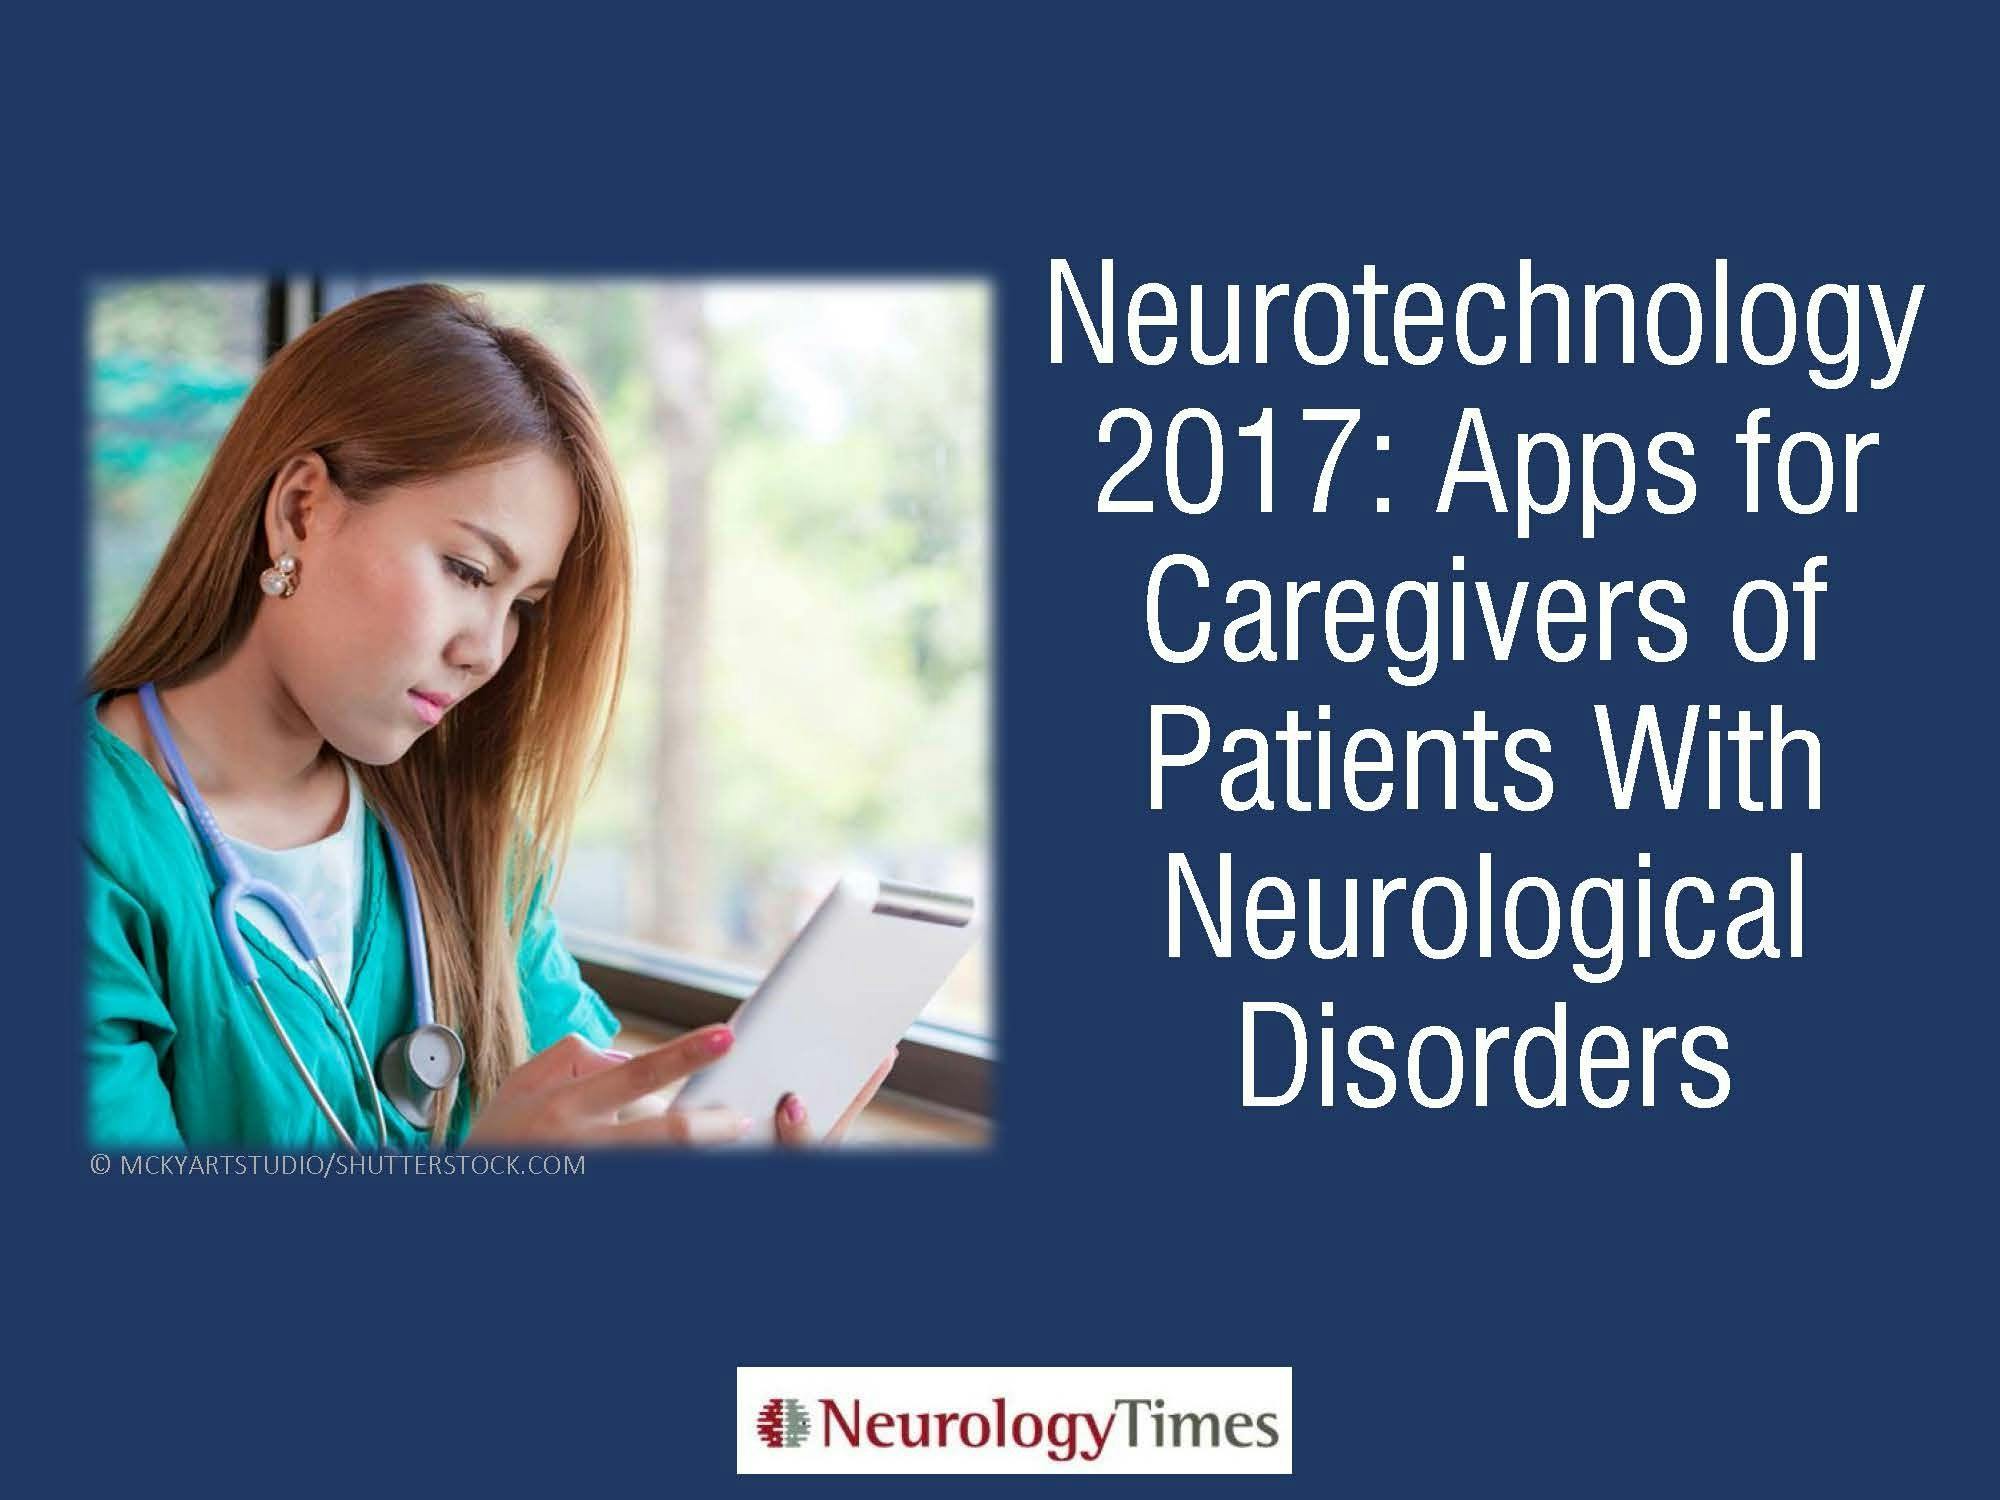 Neurotechnology in 2017: Caregiver Apps You May Have Missed